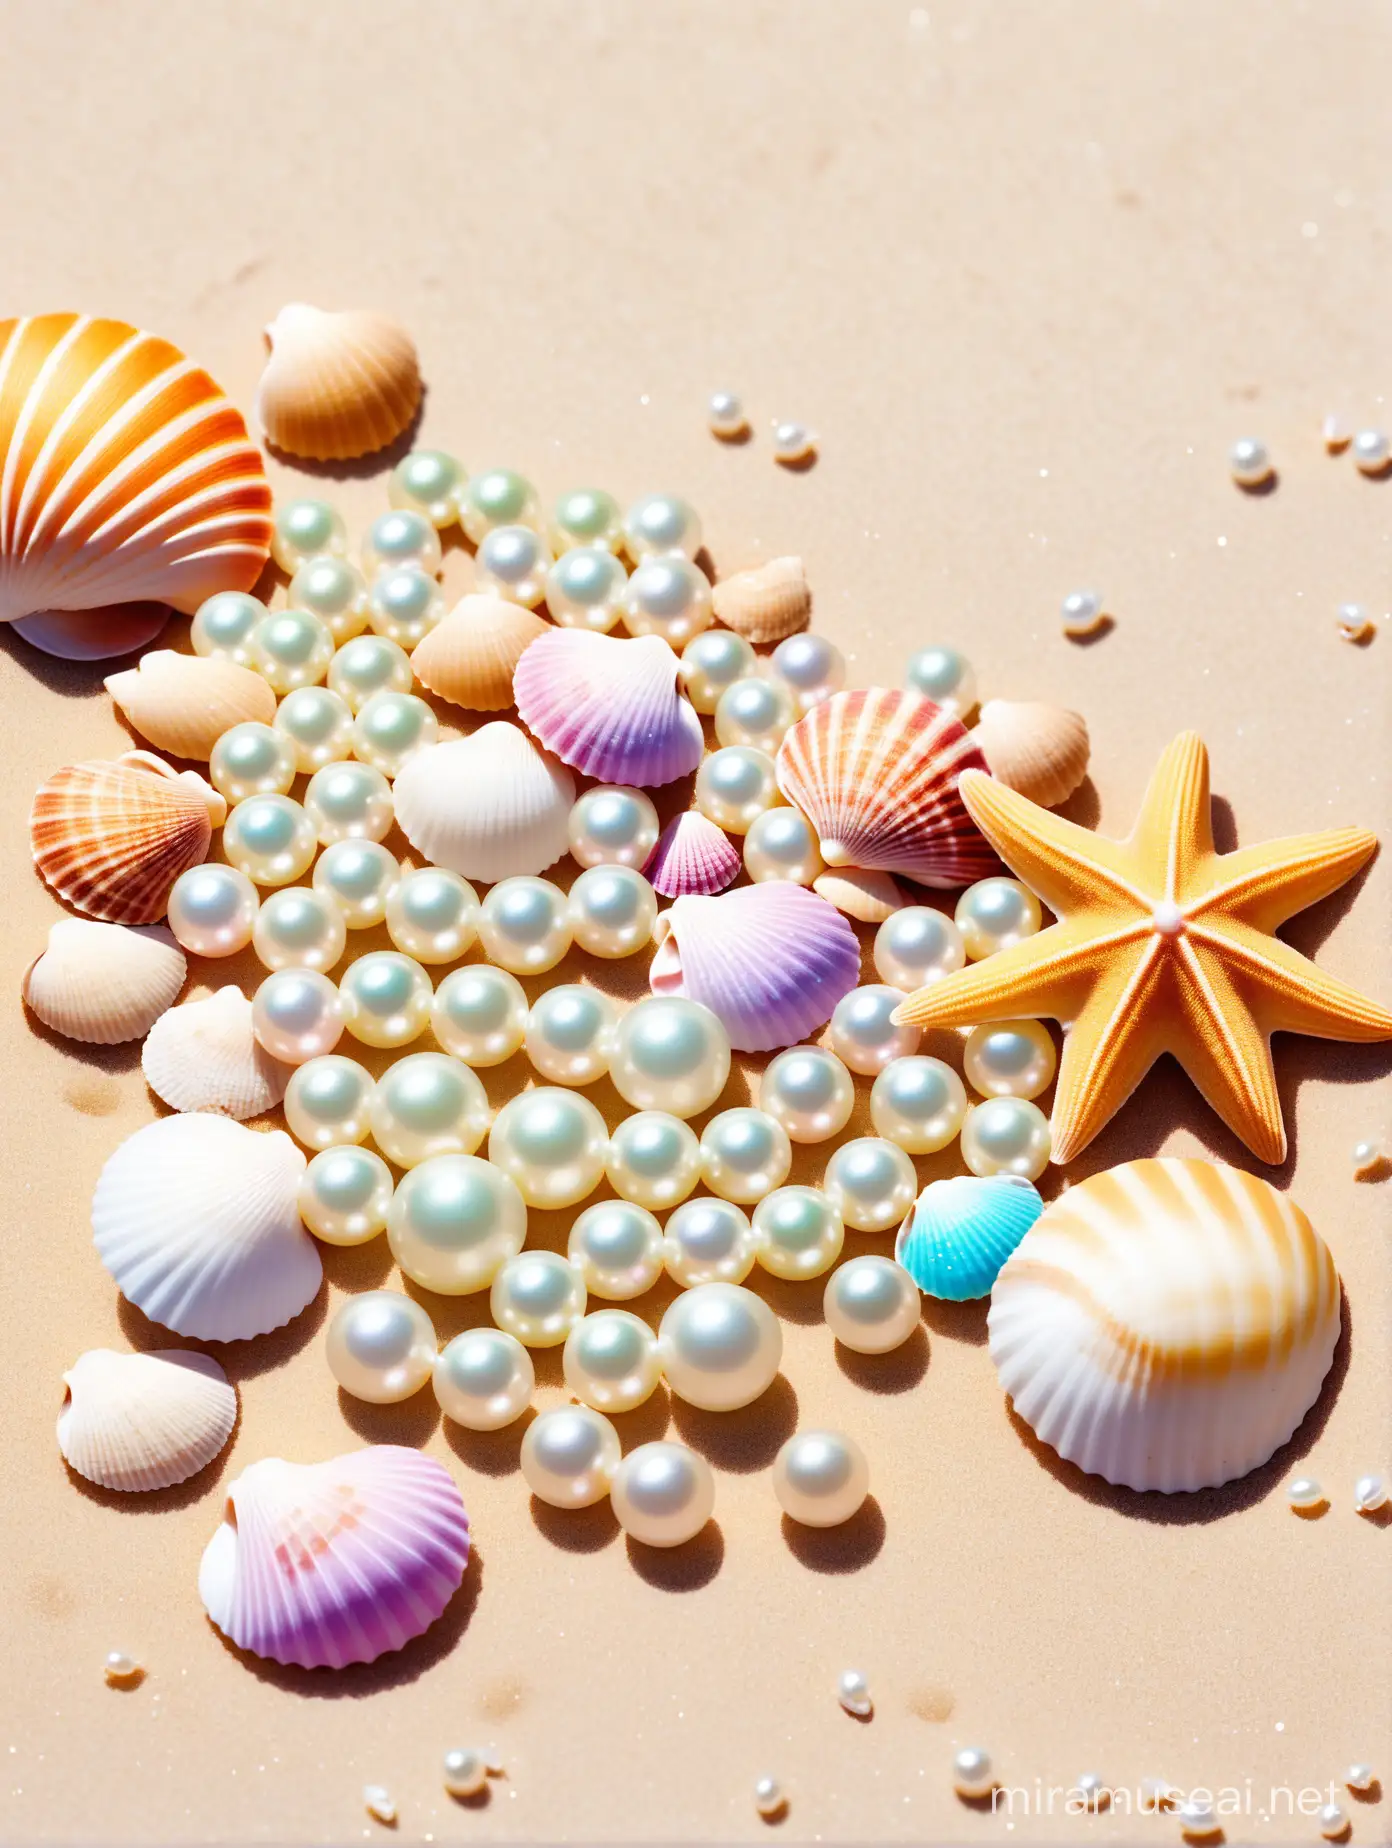 Colorful Beach Scene with Pearls and Shells